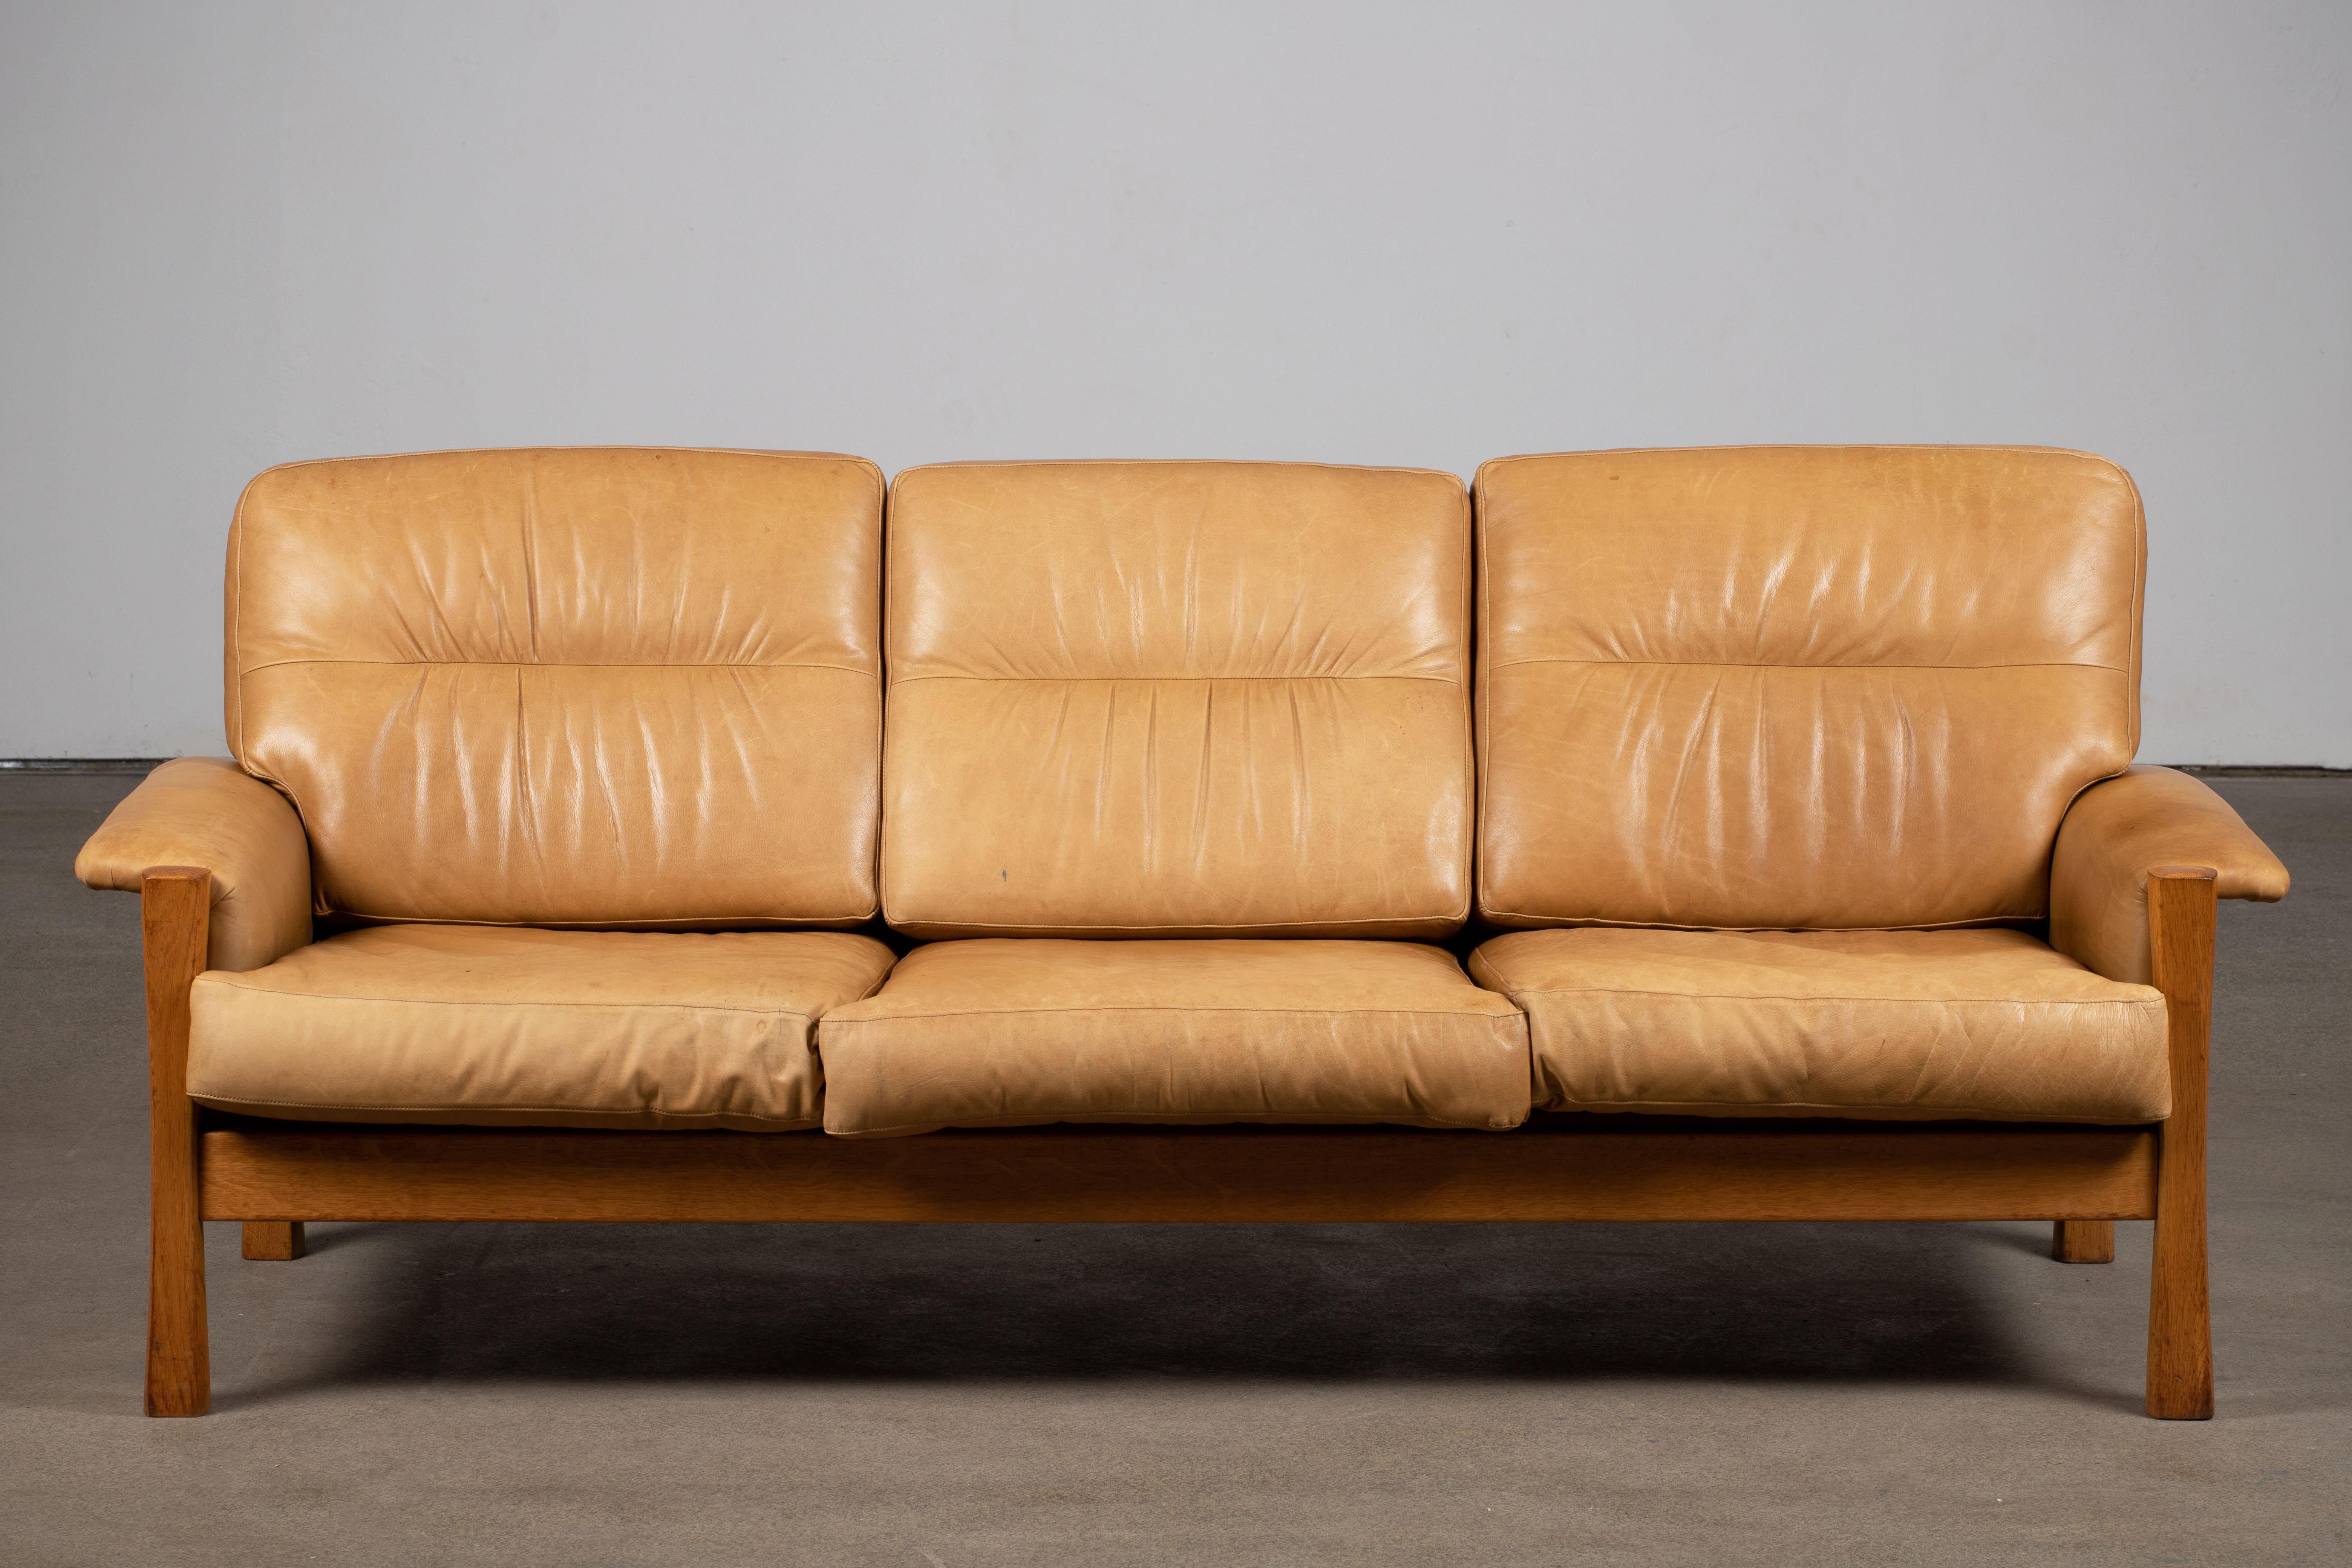 Inspired by Pierre Chapo, Mid-Century three seater sofa in Camel leather featuring a superb patina, oak wood structure. Elegant design and great comfort.

We also have the matching two seater sofa and armchair on our storefront.